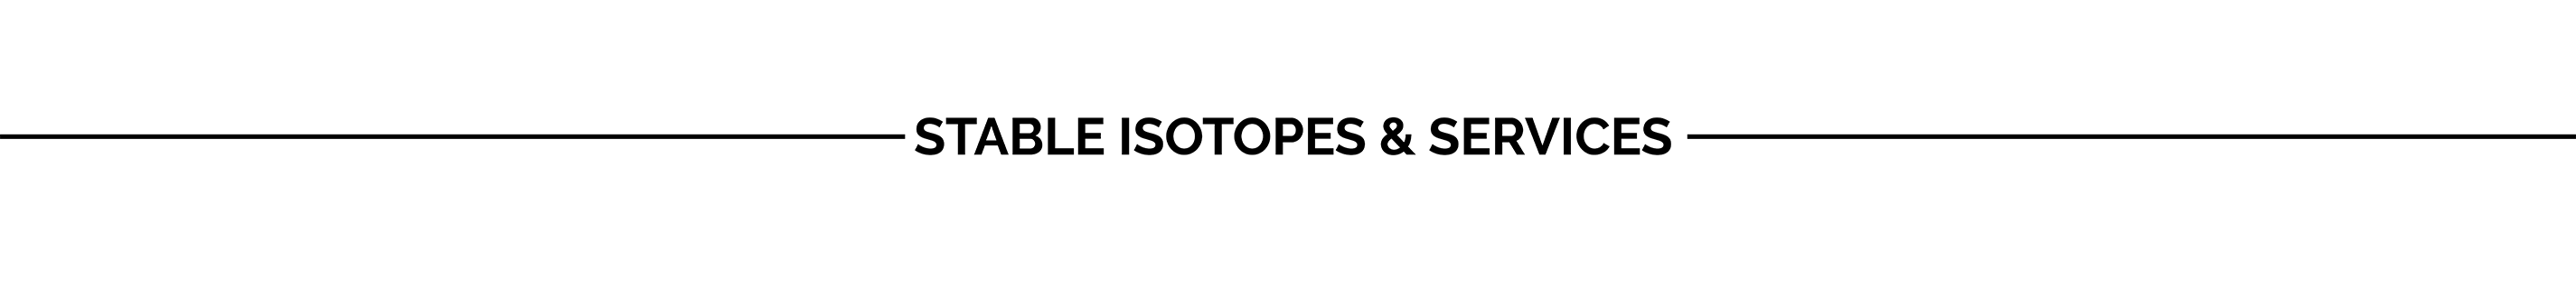 Stable Isotopes & Services